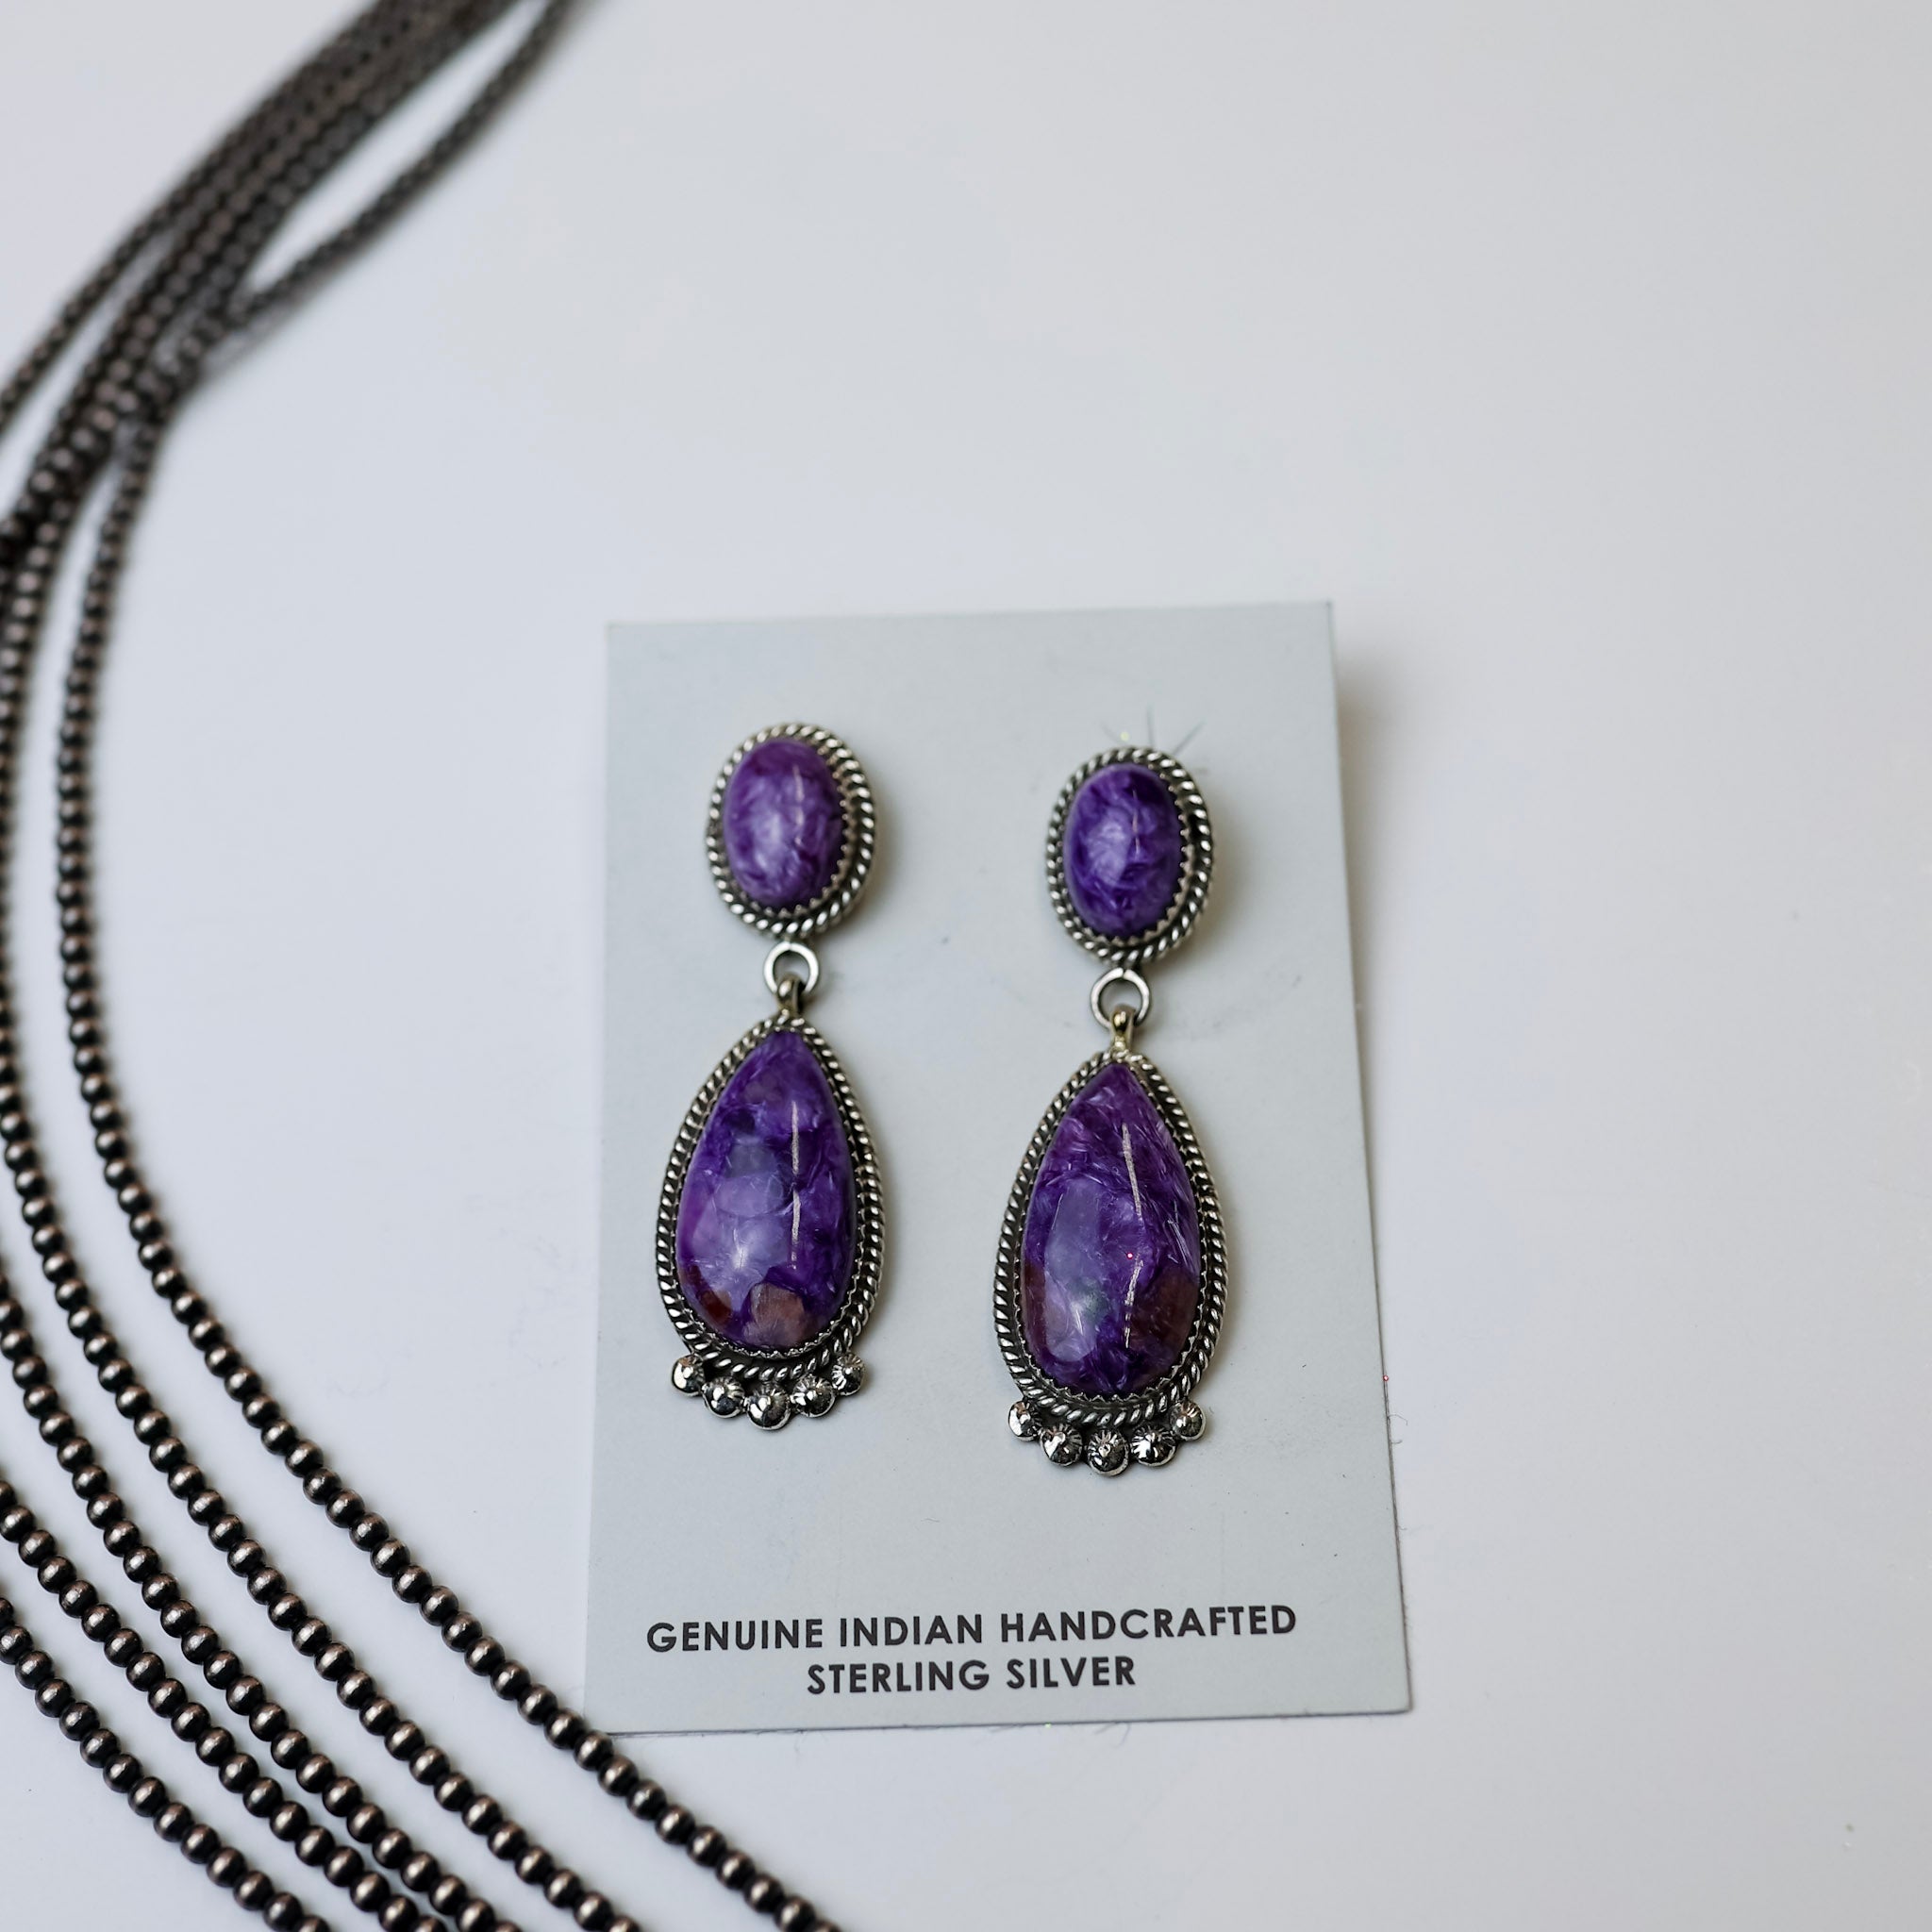 Elouise Kee Navajo Handmade Sterling Silver & Charoite Drop Earrings are centered in the middle of the picture on a white background. Navajo pearls are on the left side of the picture. 